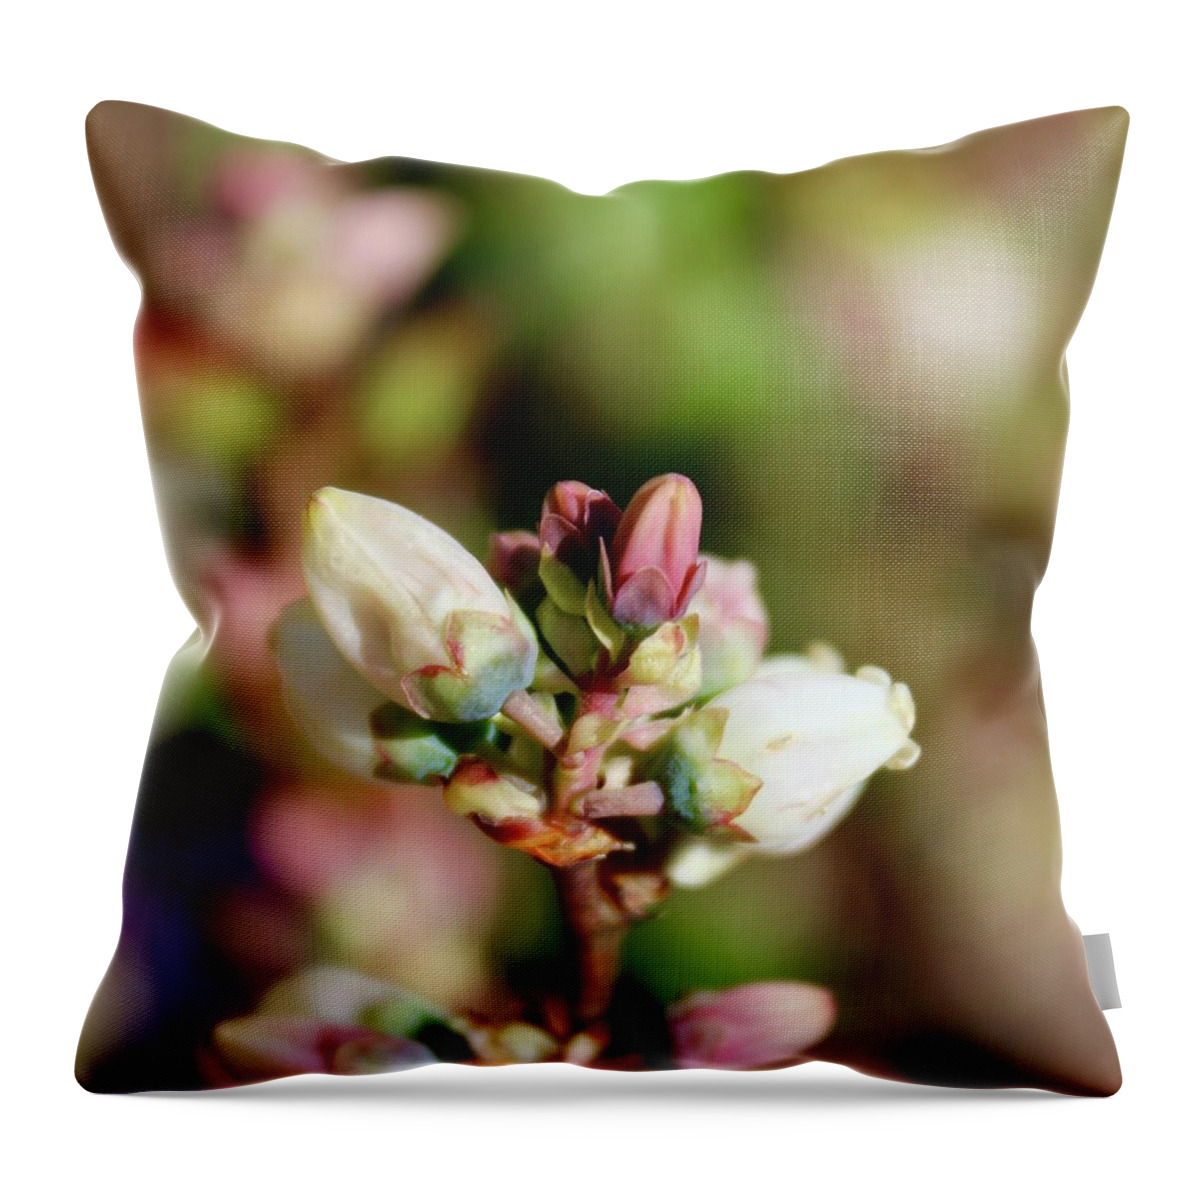 Photograph Throw Pillow featuring the photograph First Blueberry Blooms April 18 2018 by M E